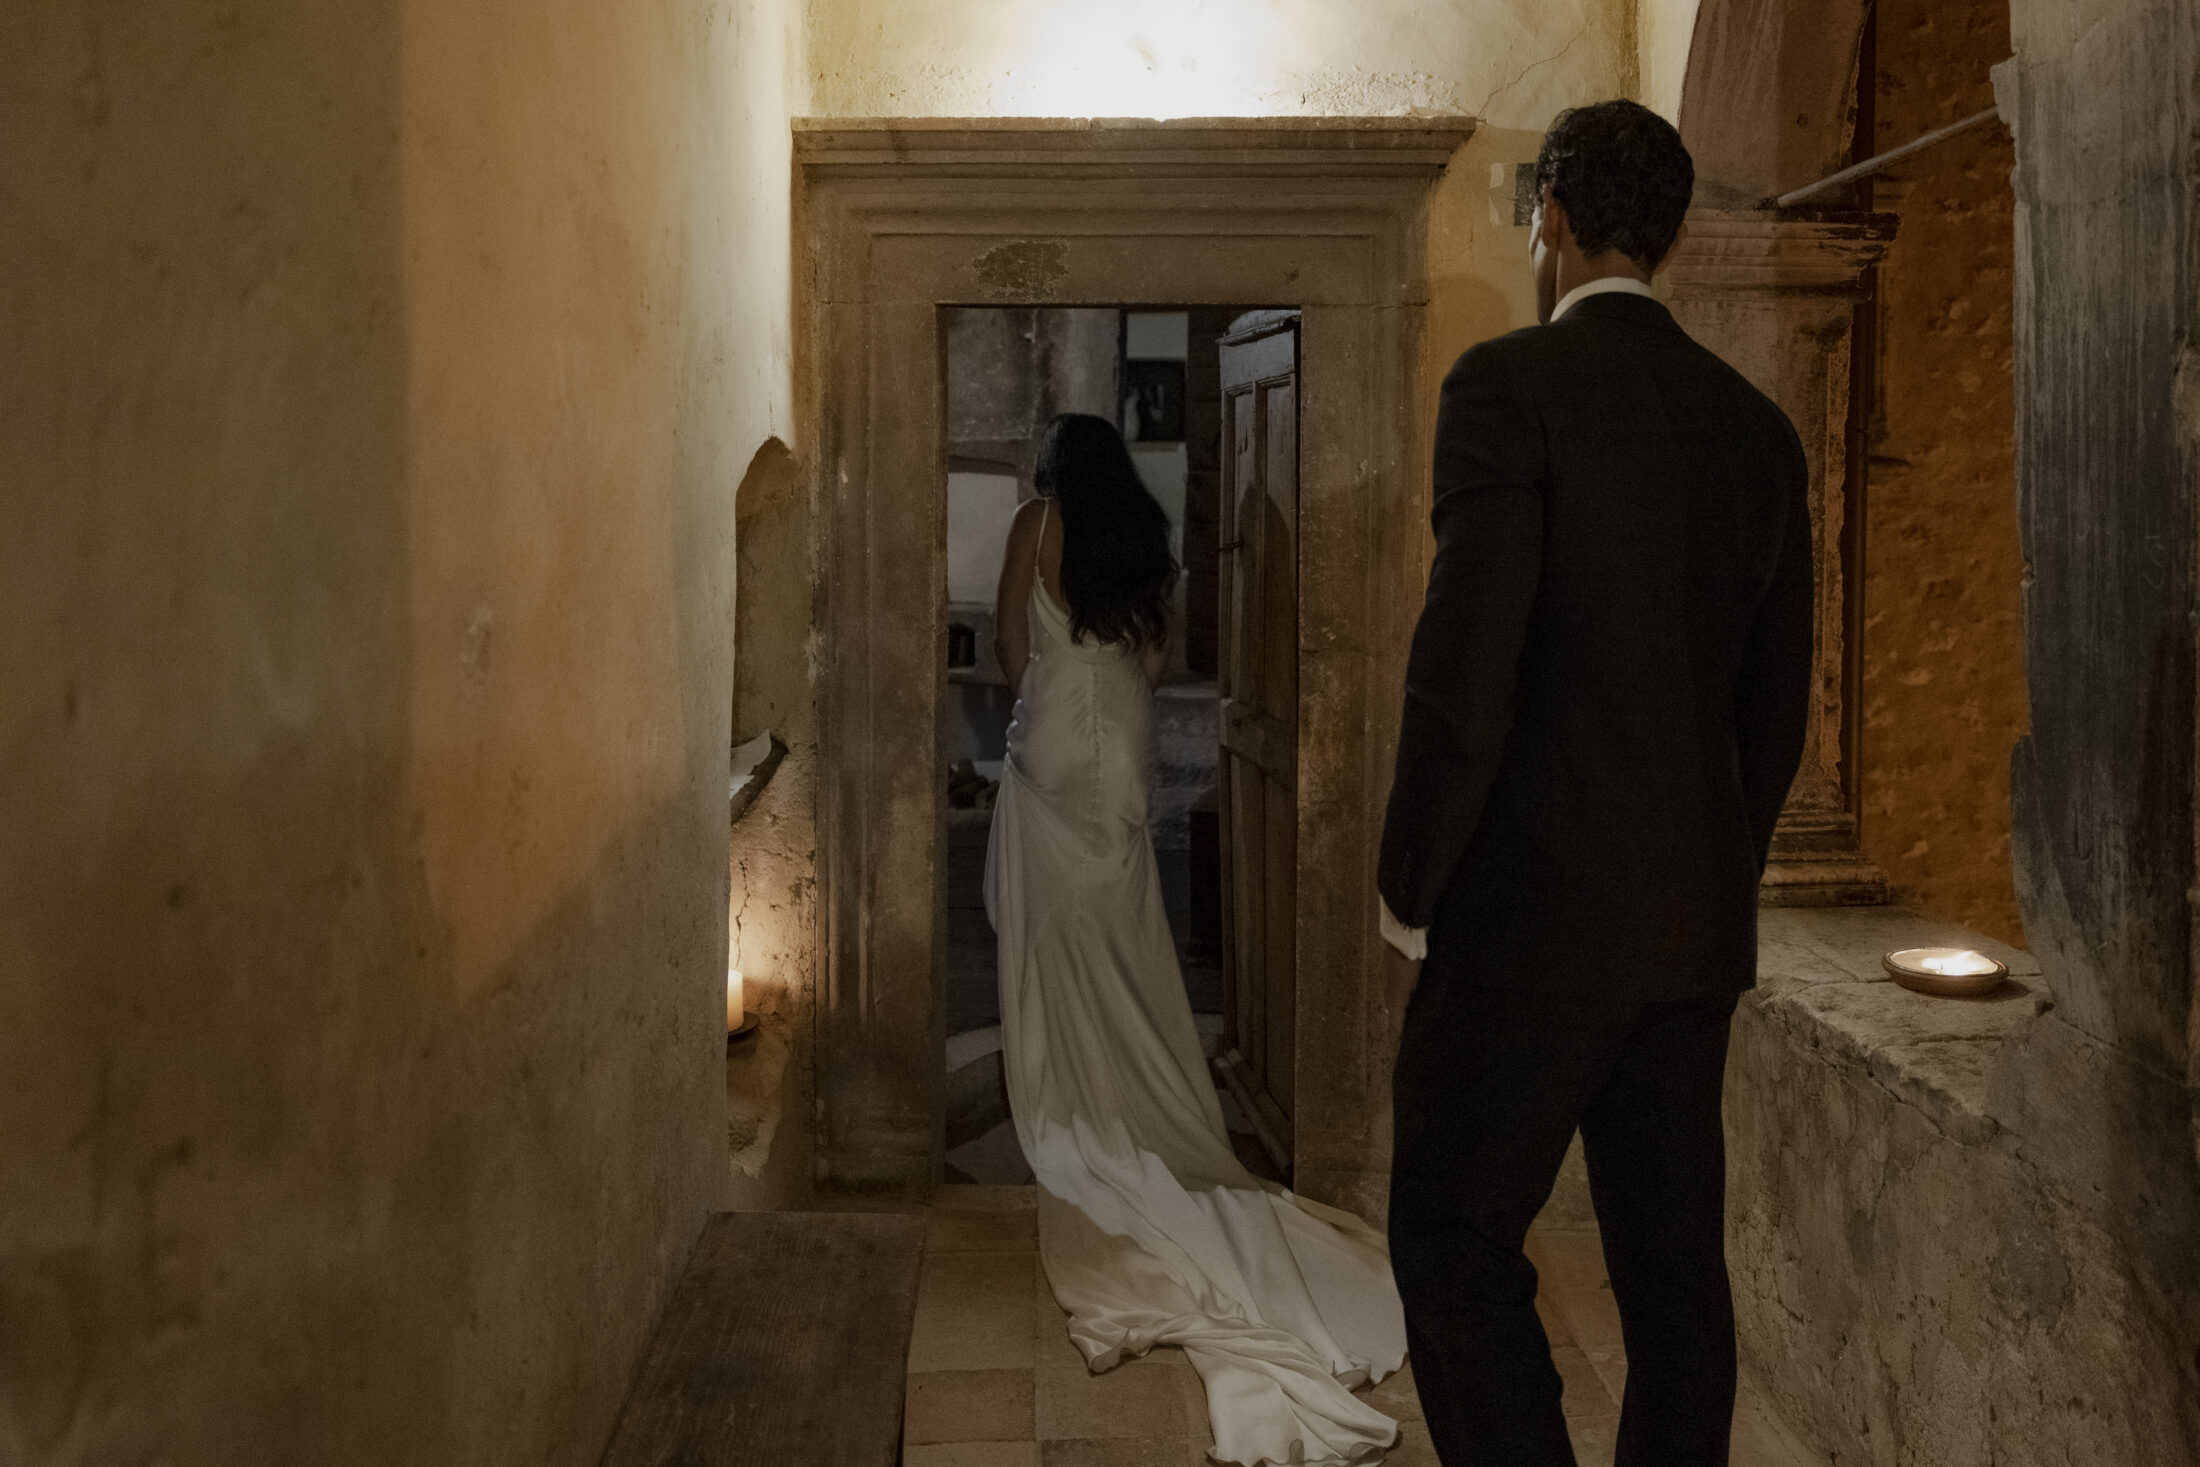 elope in italy